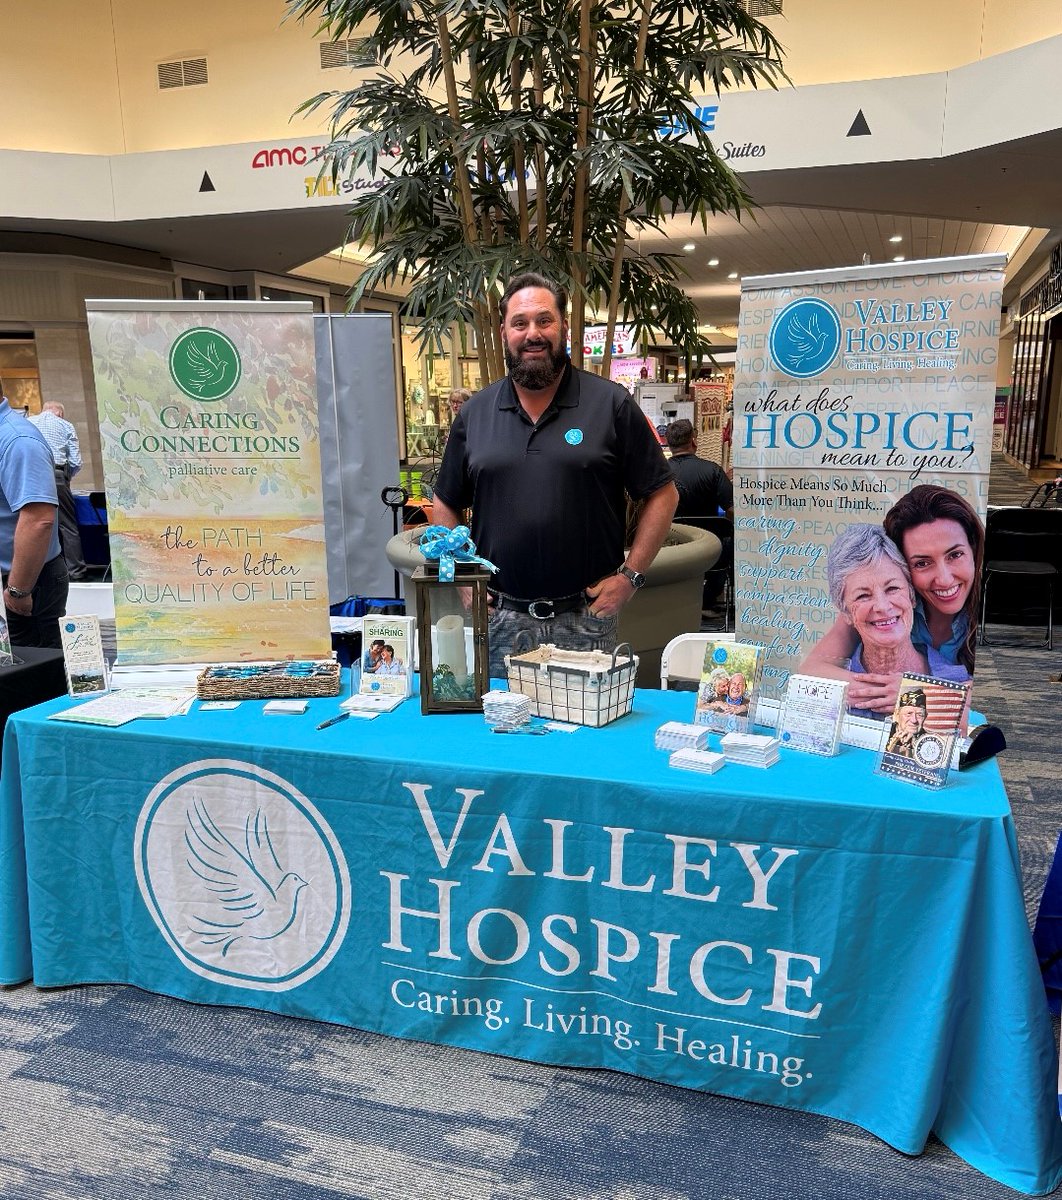 You still have a few hours to stop by the Senior Support Fair being held at the Ohio Valley Mall! There are lots of great resources available! Stop by and see Chris to learn about Valley Hospice and Caring Connections Palliative Care. The Senior Support Fair lasts until 2p.m.!